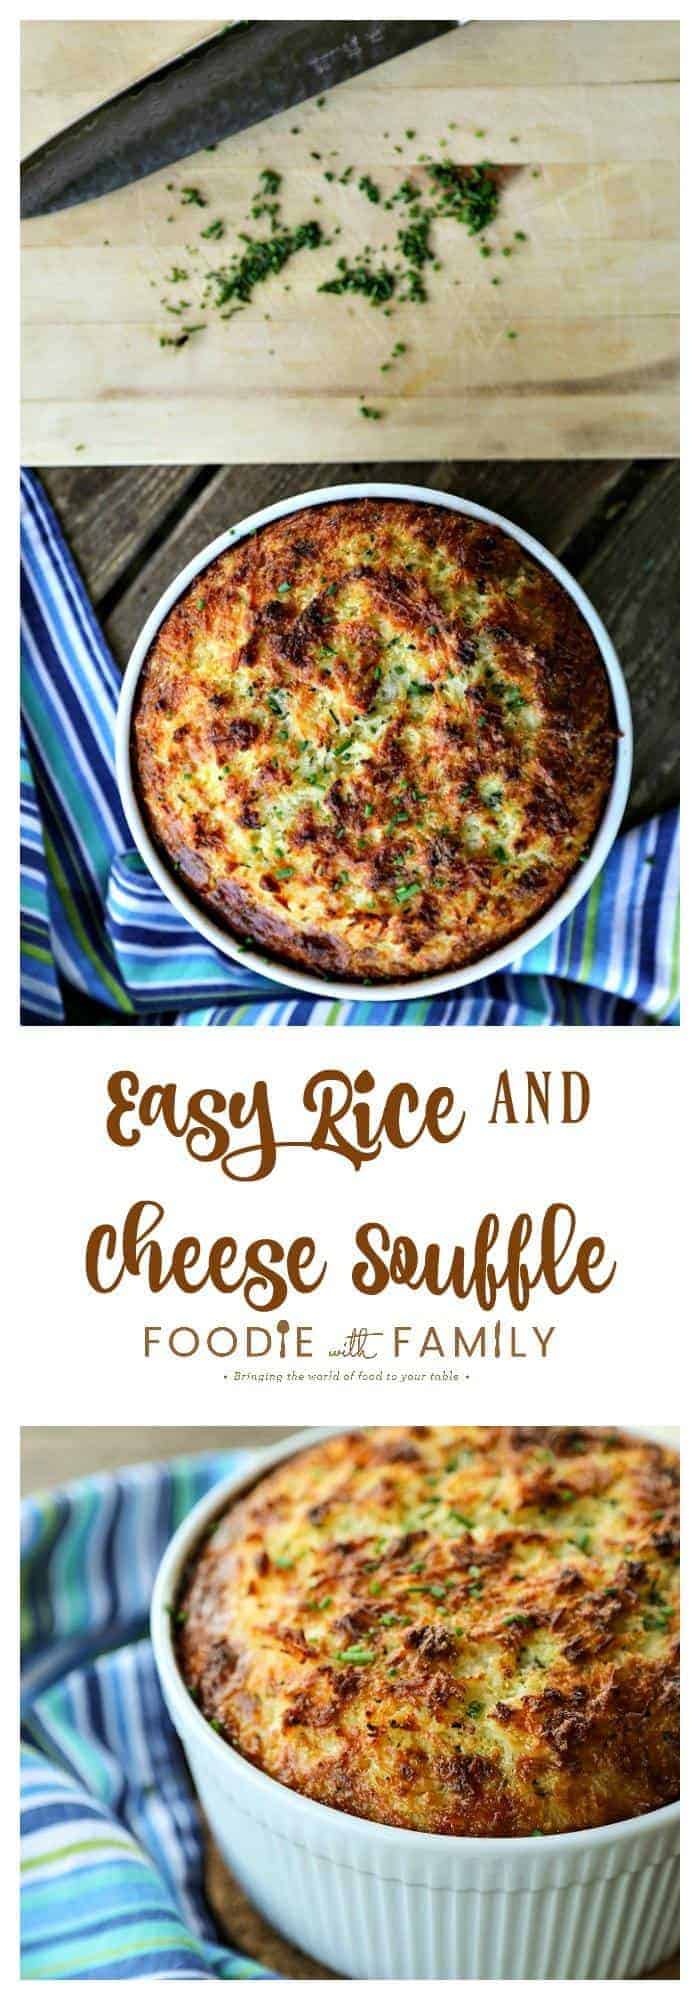 Easy Rice and Cheese Souffle is a delicious, comforting, quick, and frugal dinner when accompanied by a green salad!